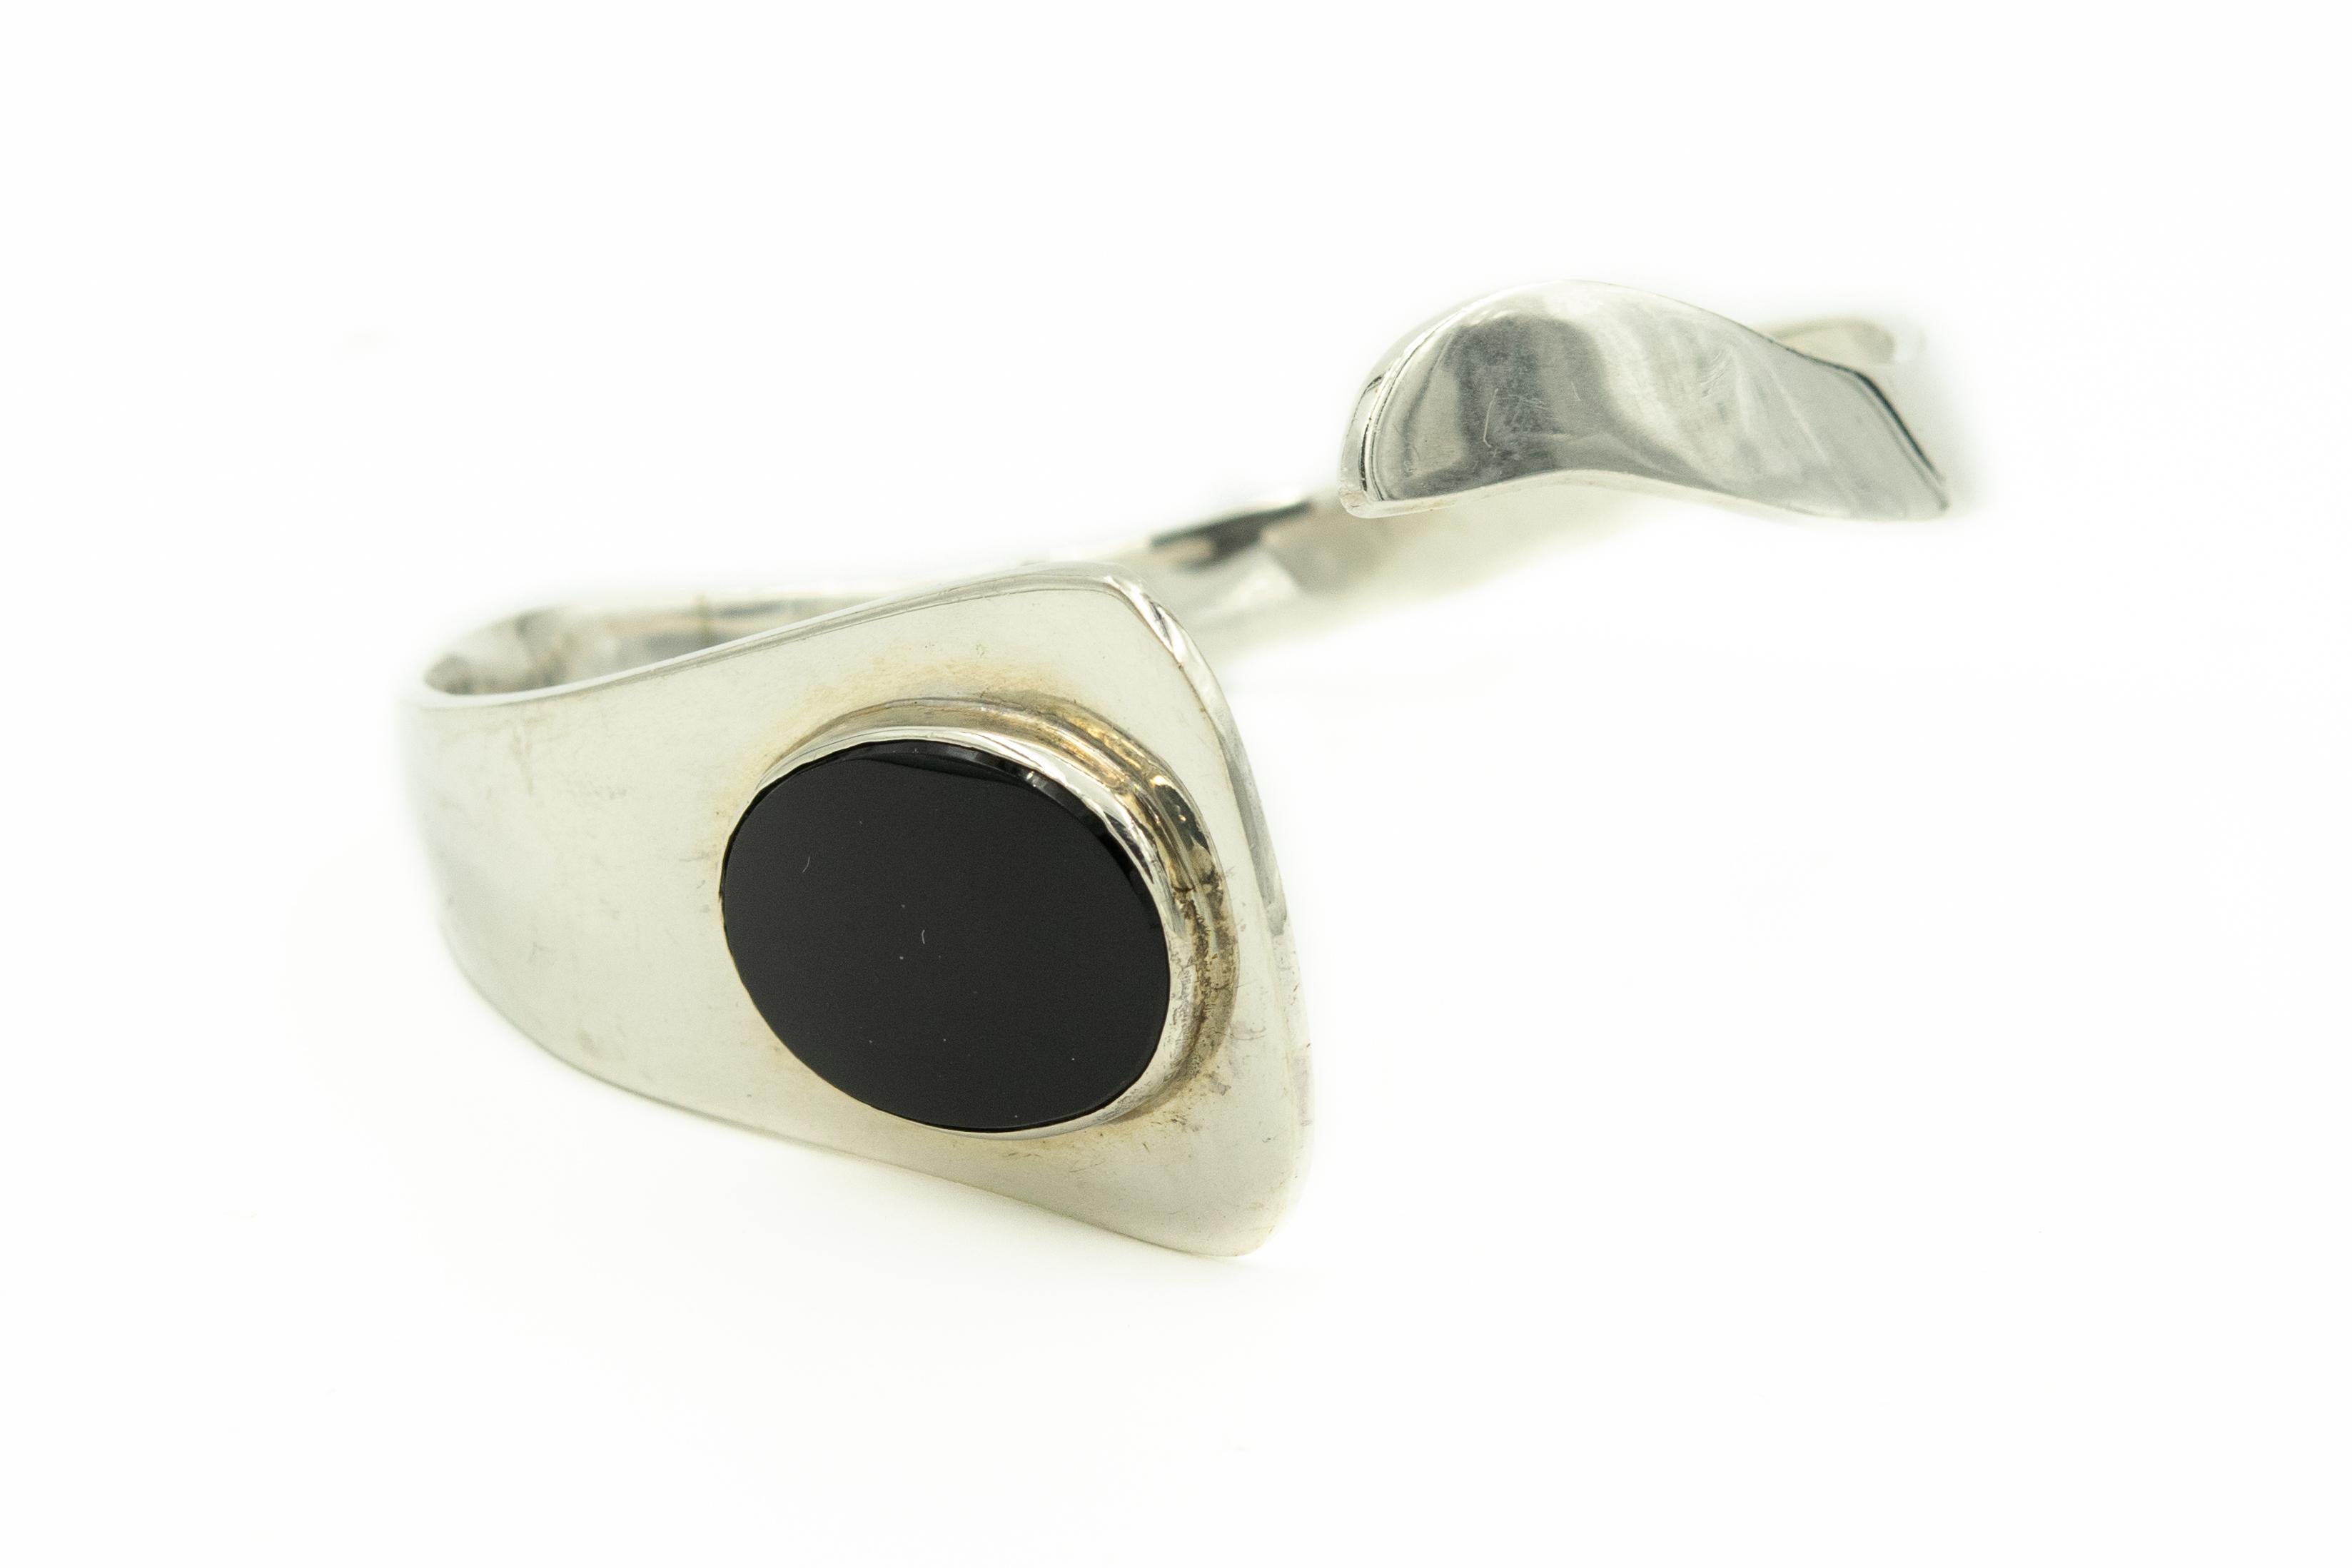 MIGHT HAVE REPAIR ON BRACELET

This stunning bracelet was designed by Andreas Mikkelsen a silversmith who worked at Georg Jensen.  The bracelet has an oval shaped flat onyx accent piece.
Bracelet measures 2.5